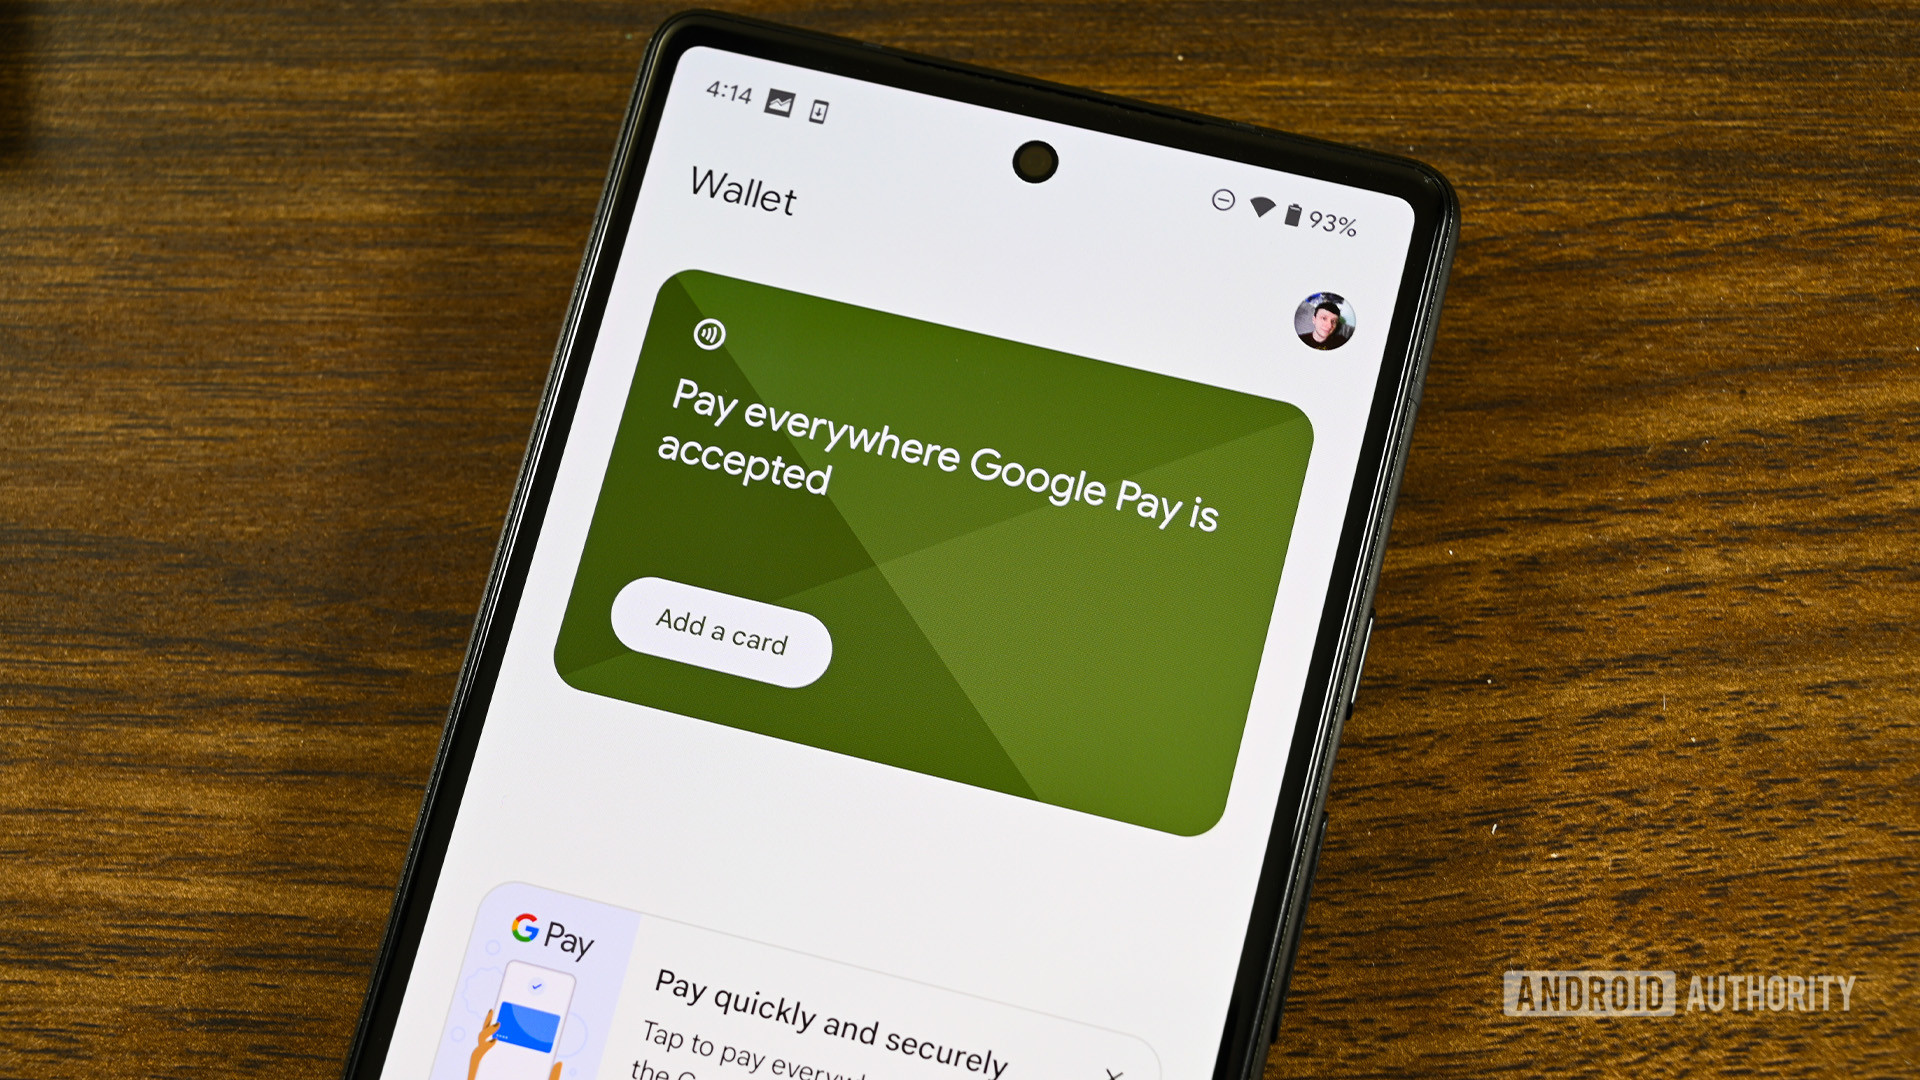 Google Wallet will let you add gym card and any other pass with a photo